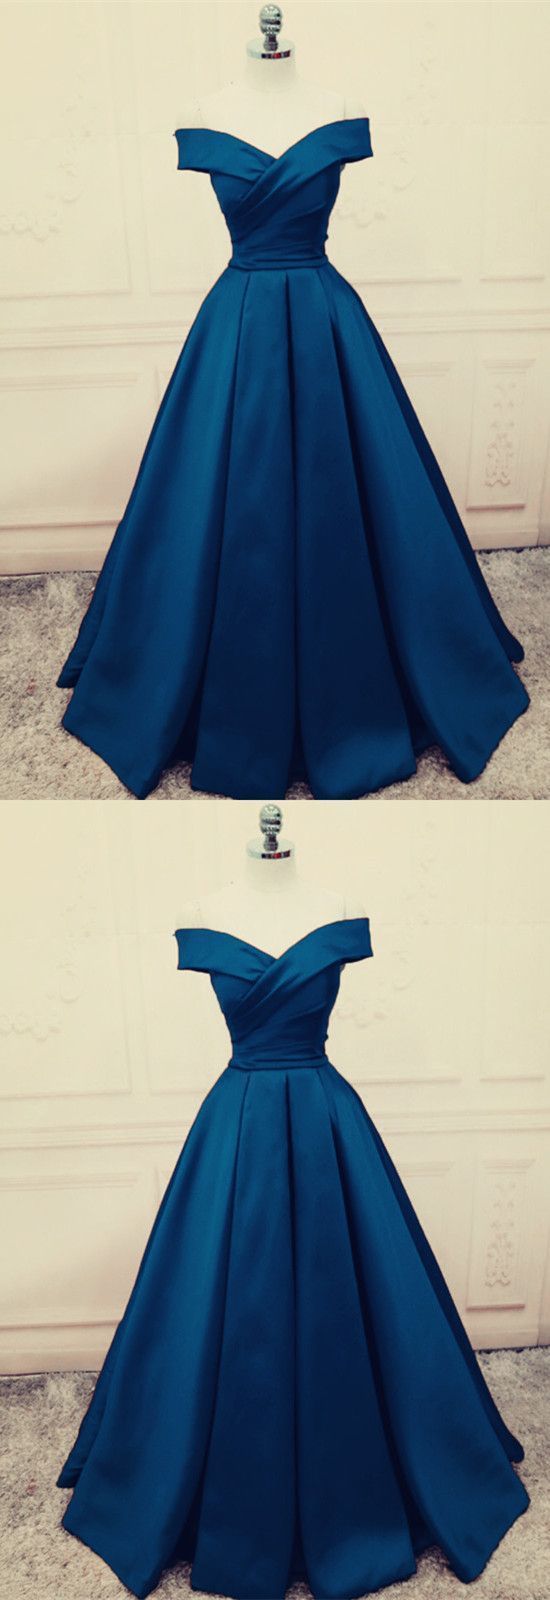 Fashion Ruched Navy Blue Satin Prom Dress A Line Women Prom Gowns ,long Evening Dress, Custom Made Evening Party Gowns